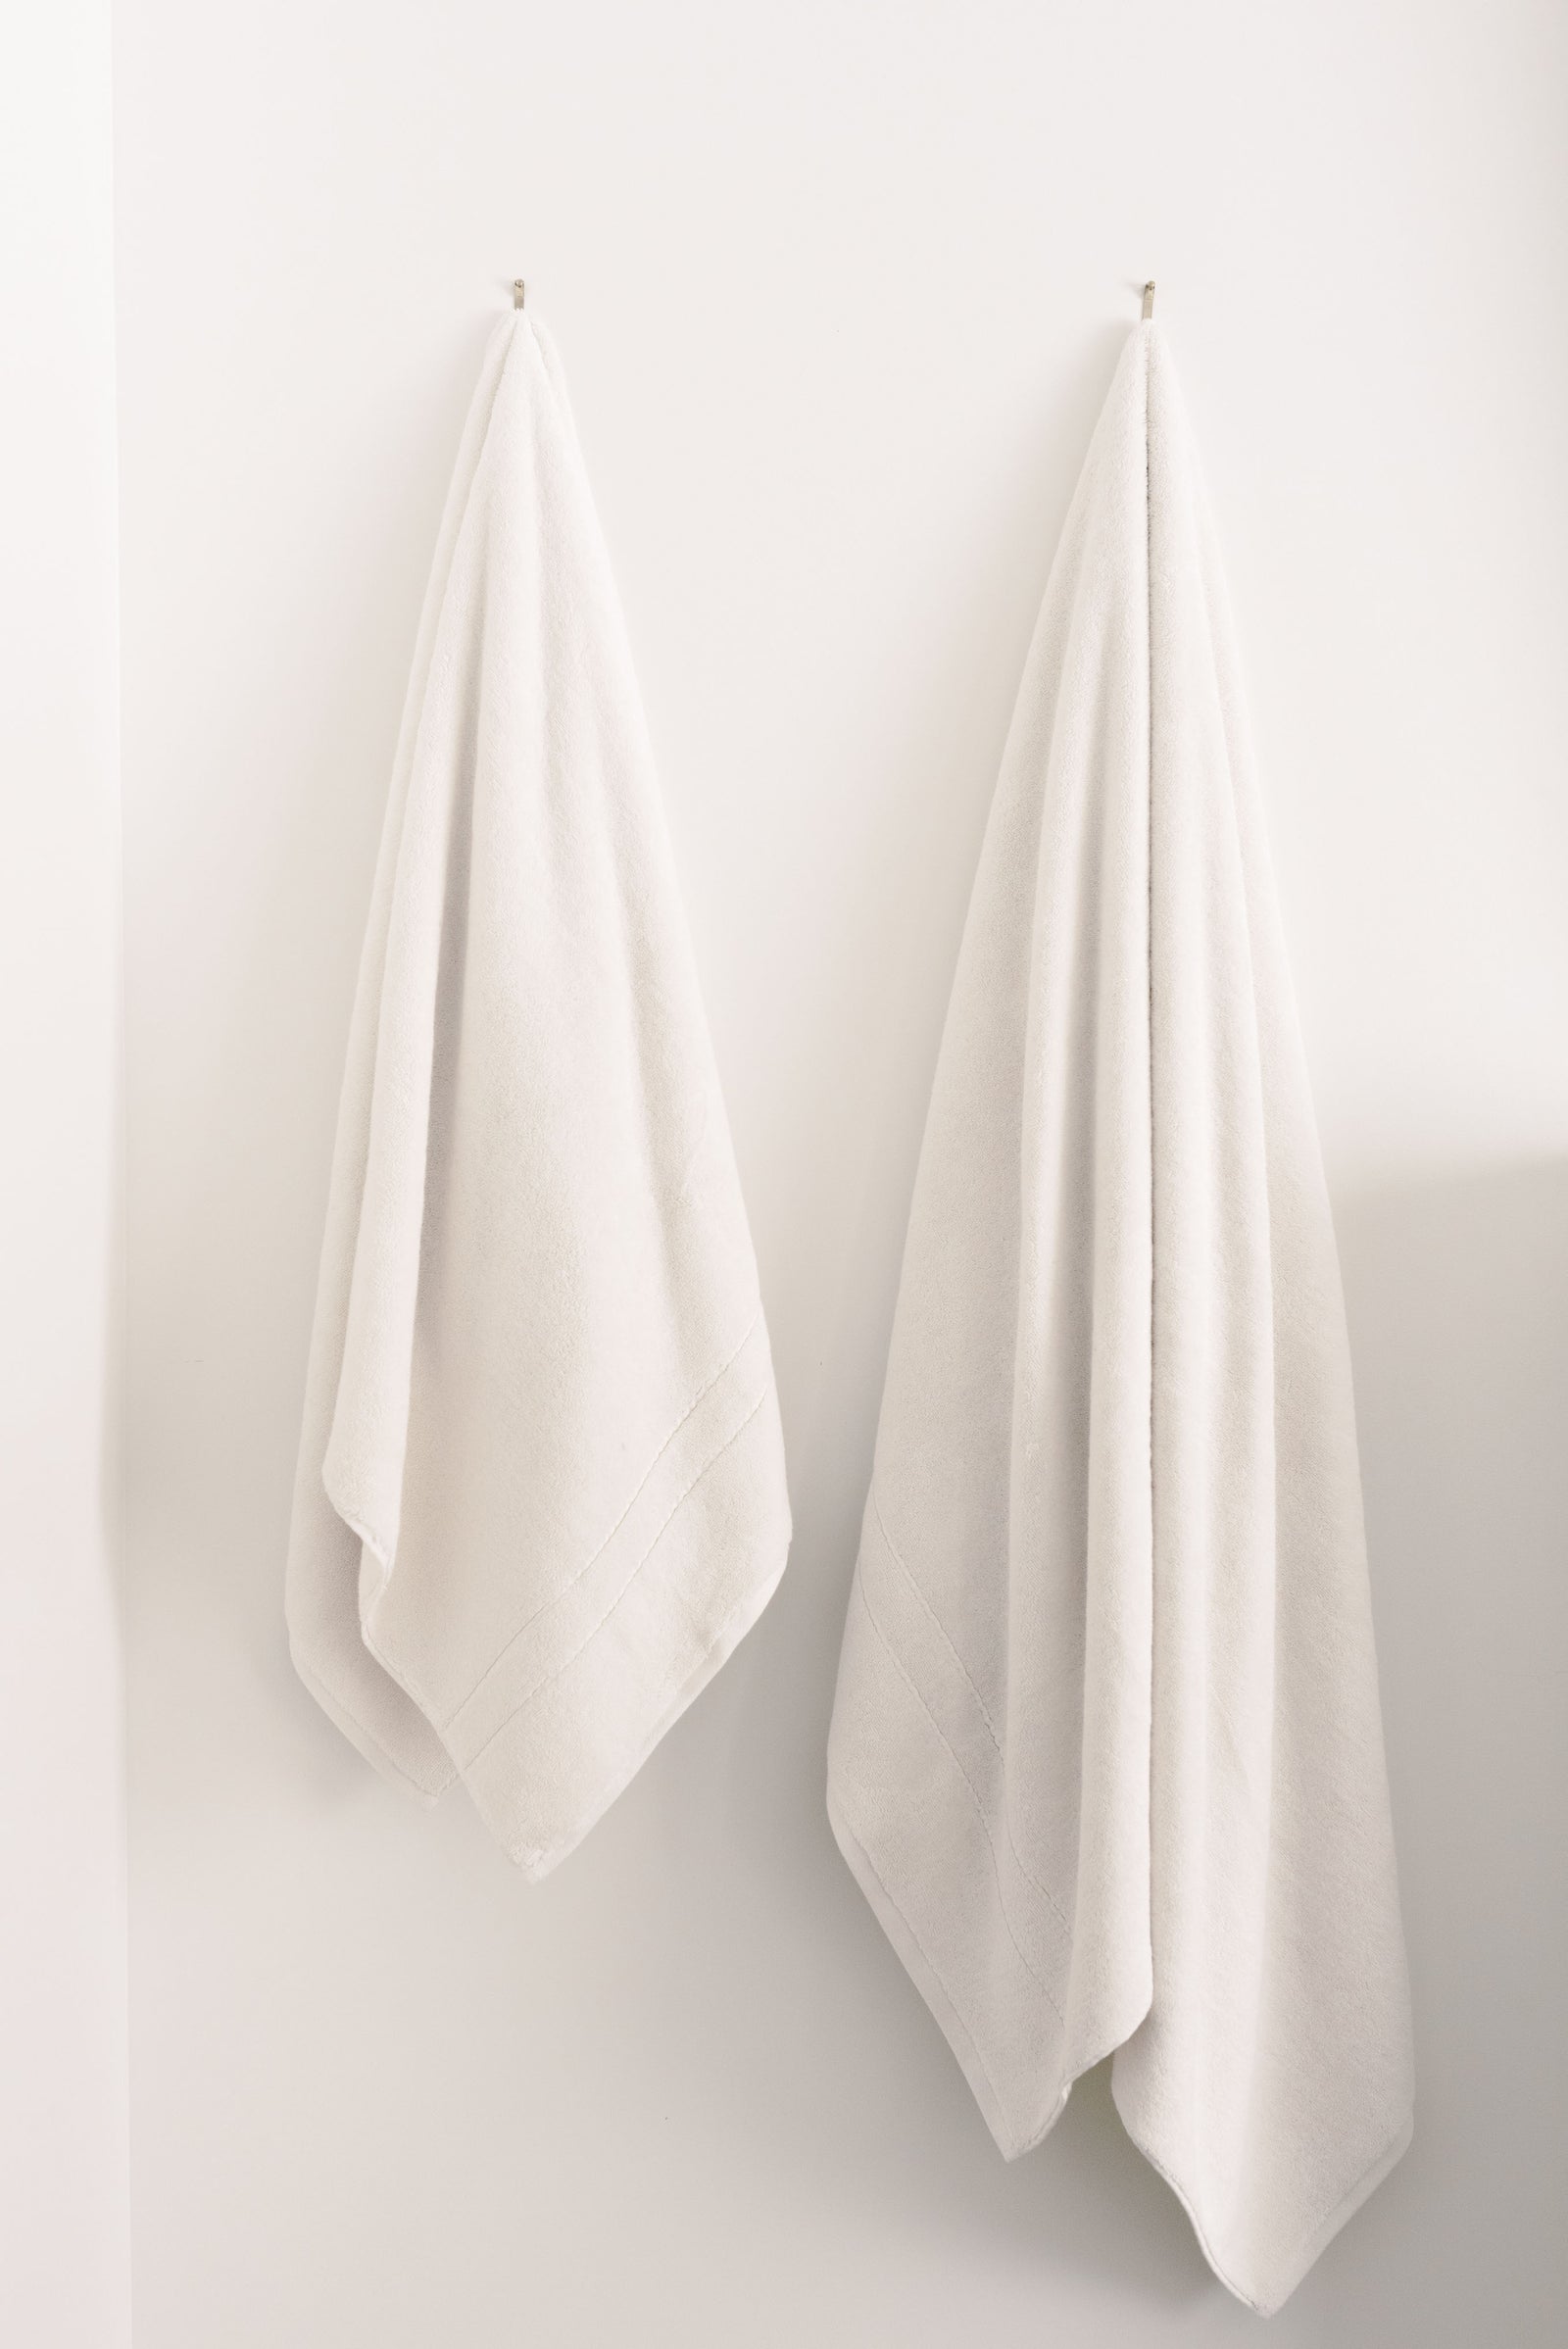 Premium Plush Bath Towels/sheets in the color seashell. Photo of Premium Plush Bath Towels taken in a bathroom showing the towels which are hung from a towel rack. 